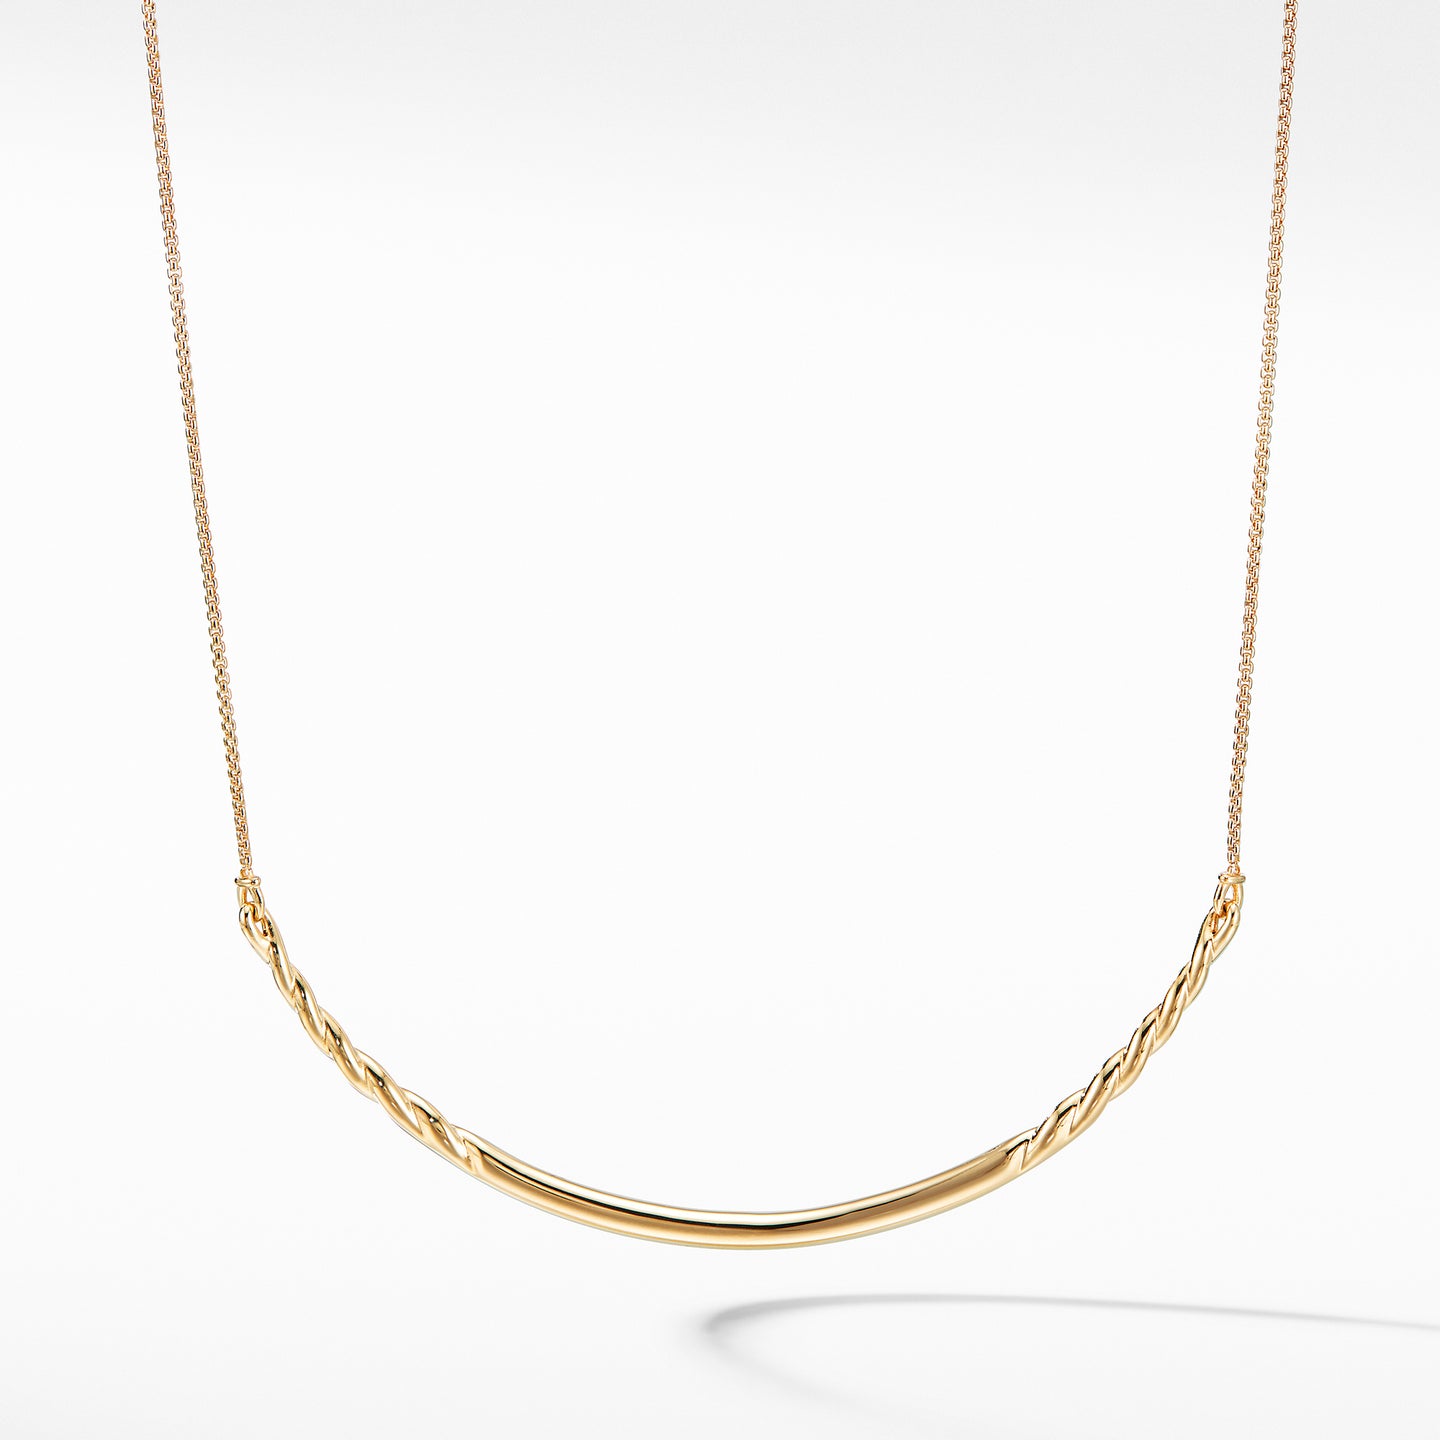 Pure Form® Collar Necklace in 18K Gold, 17